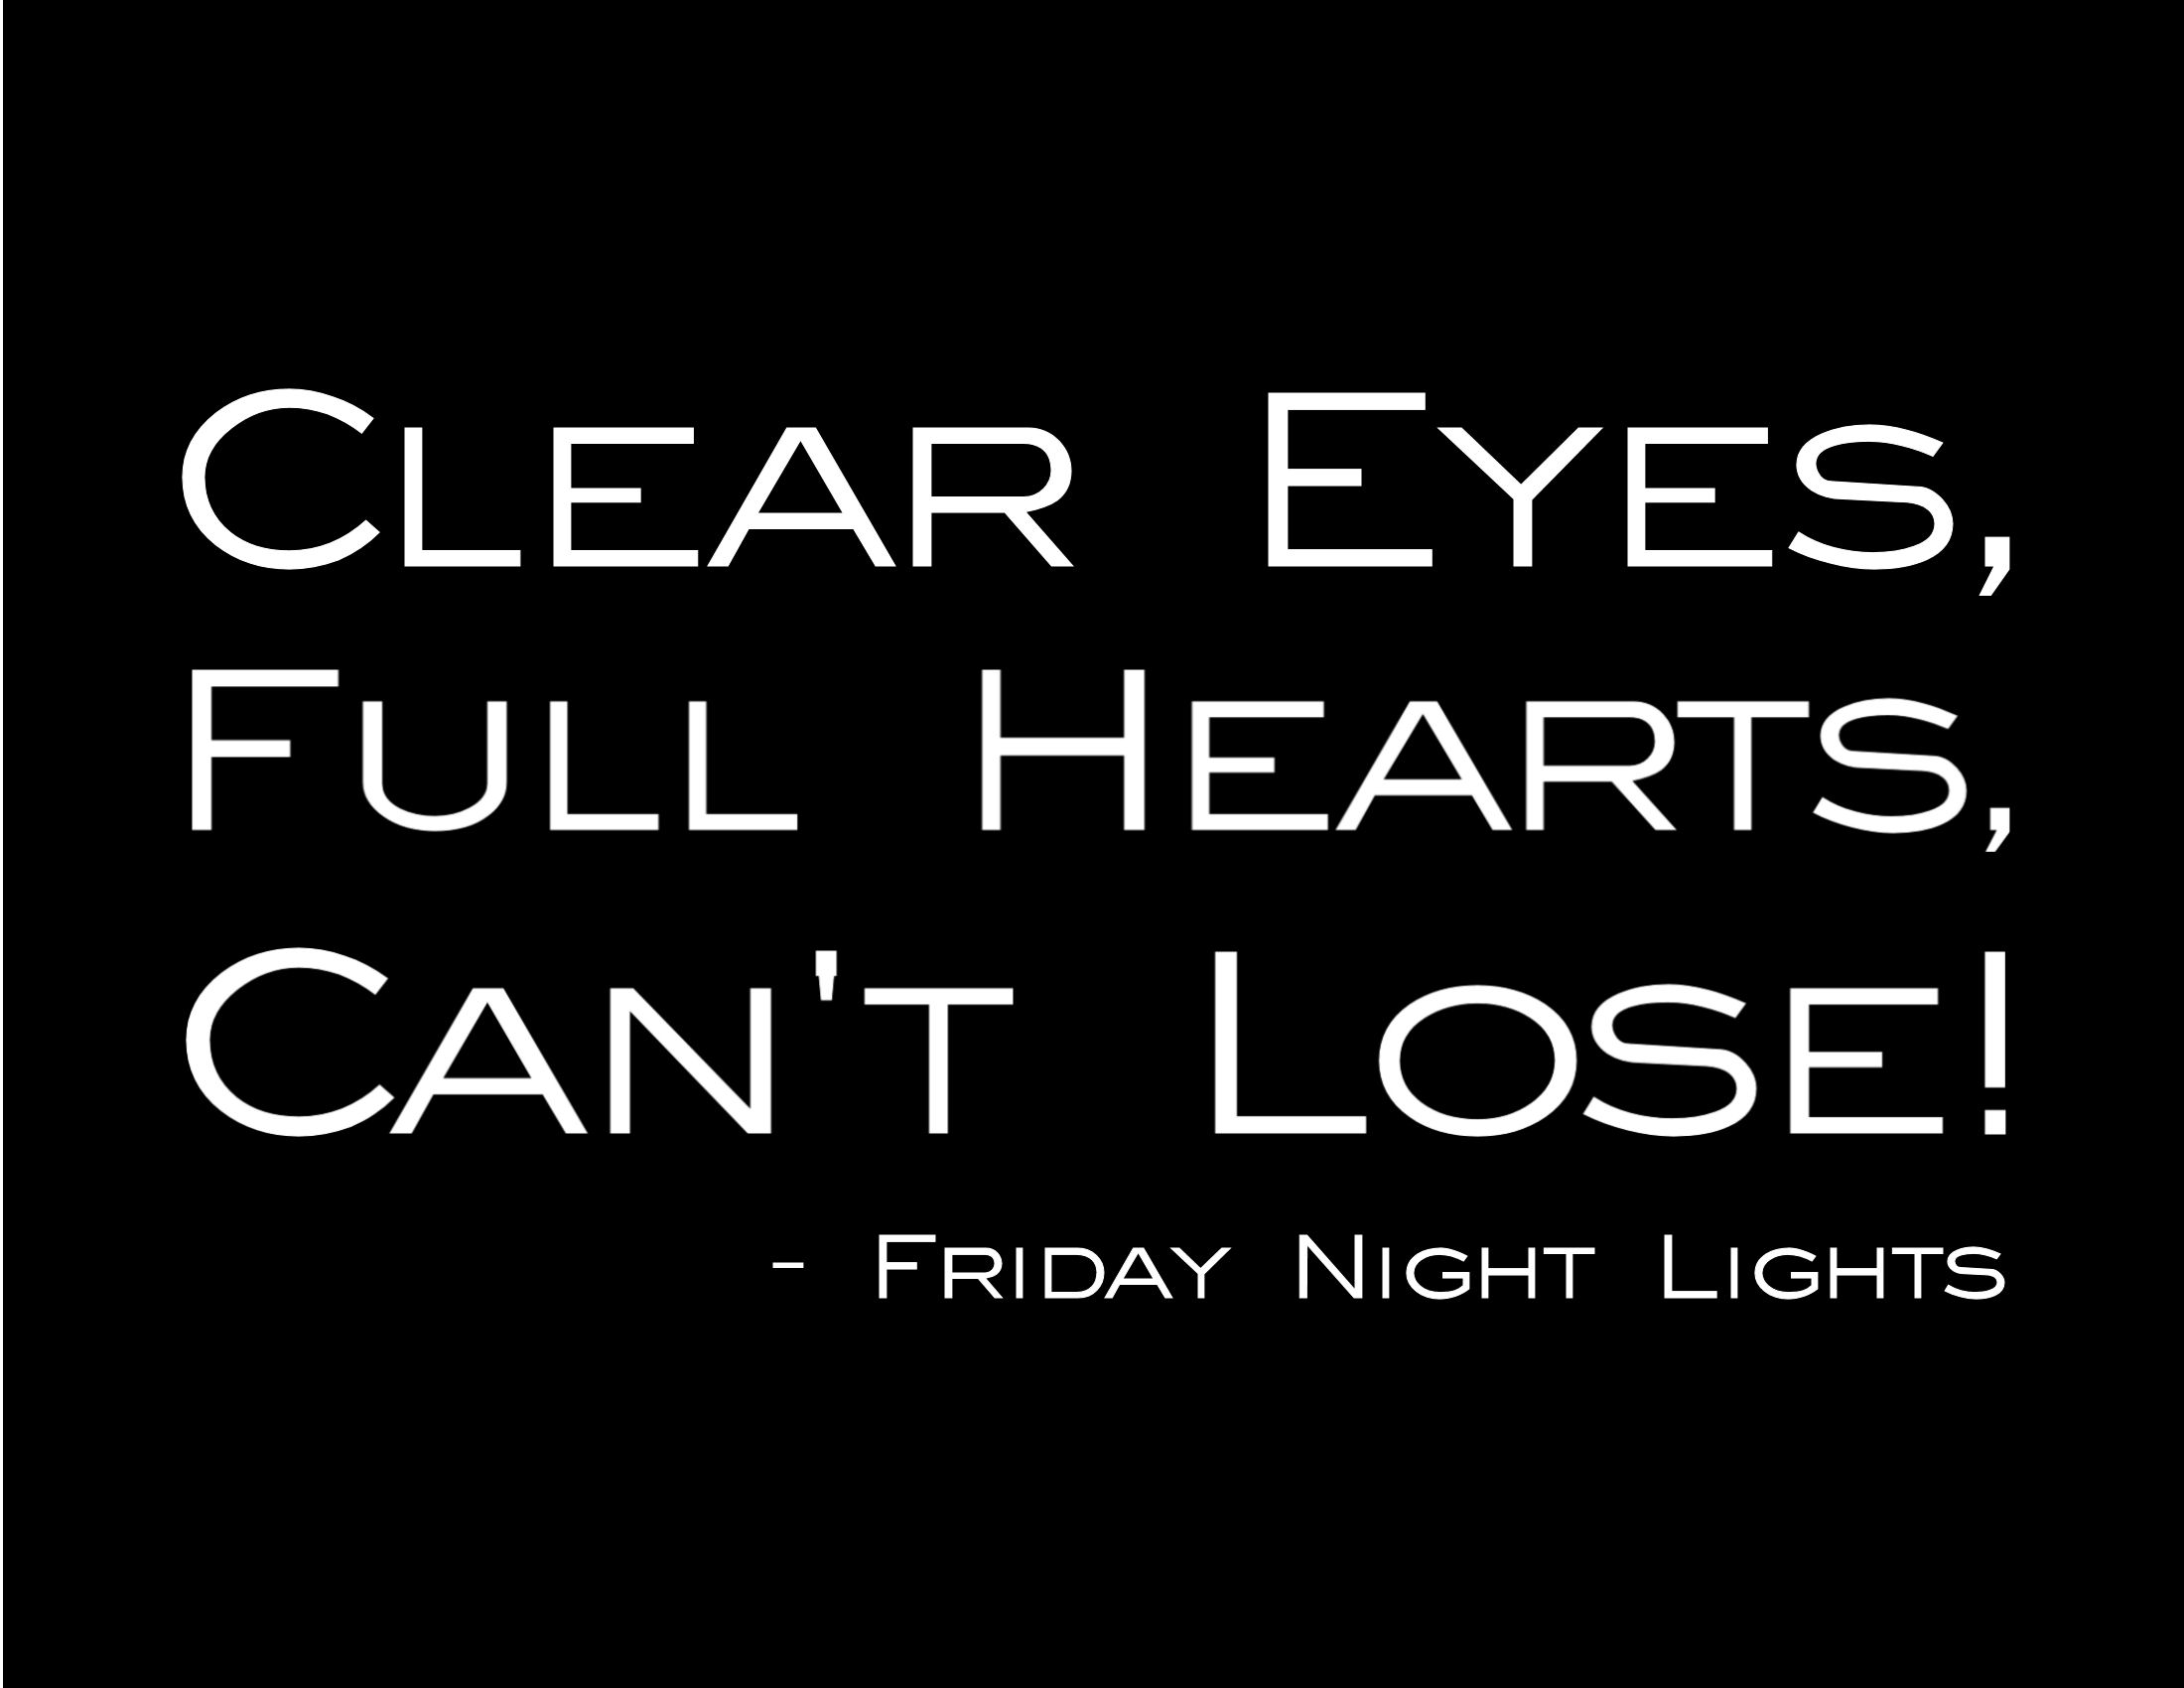 CLEAR EYES FULL HEARTS CAN'T LOSE Vinyl Wall Sticker Lettering Quote Words